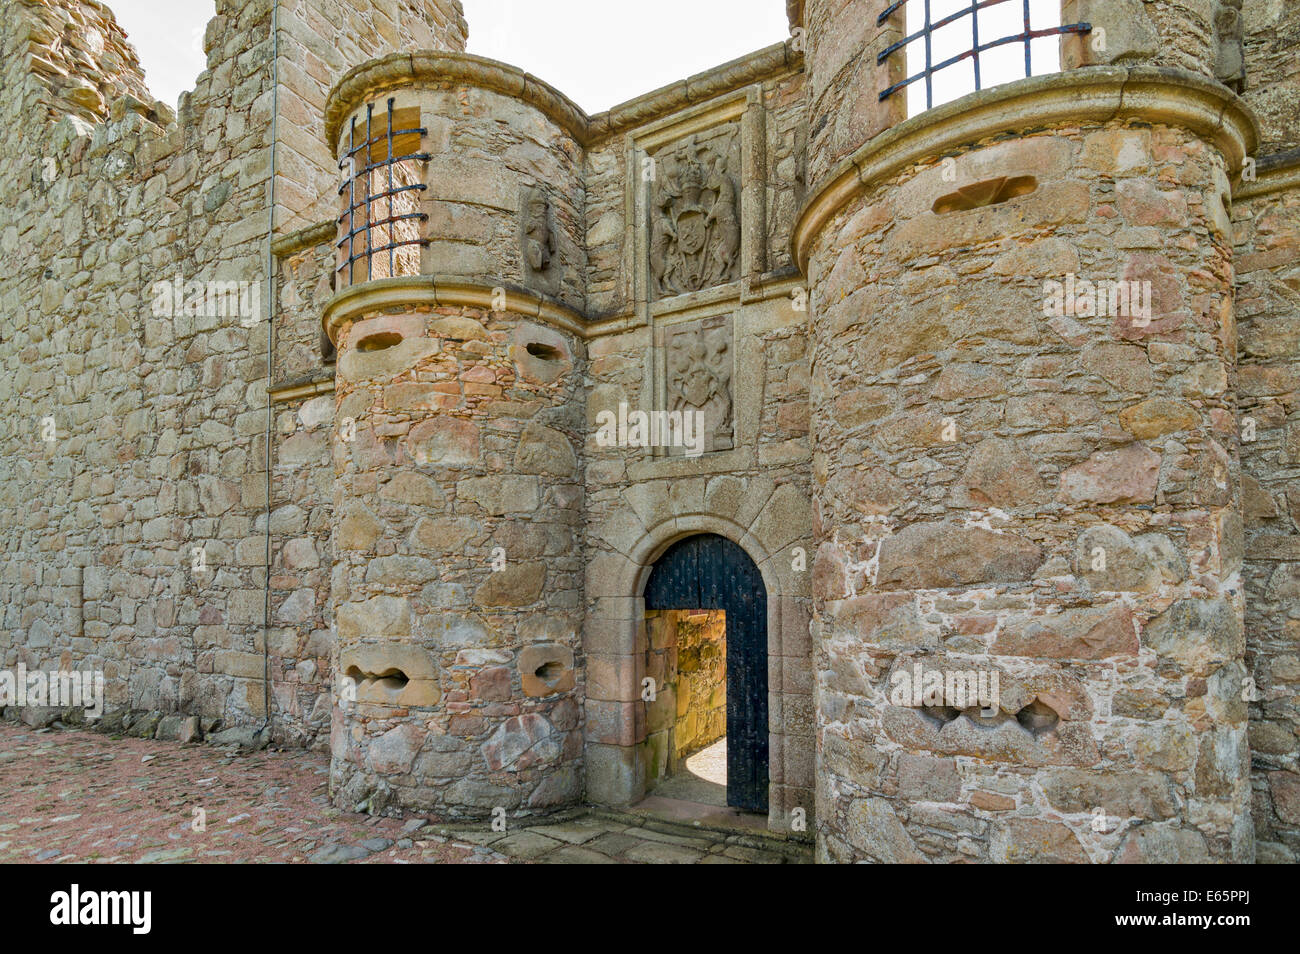 TOLQUHON CASTLE ABERDEENSHIRE SCOTLAND THE GATEWAY WITH TOWERS AND GUN PORTS AND CARVED FIGURES ABOVE Stock Photo